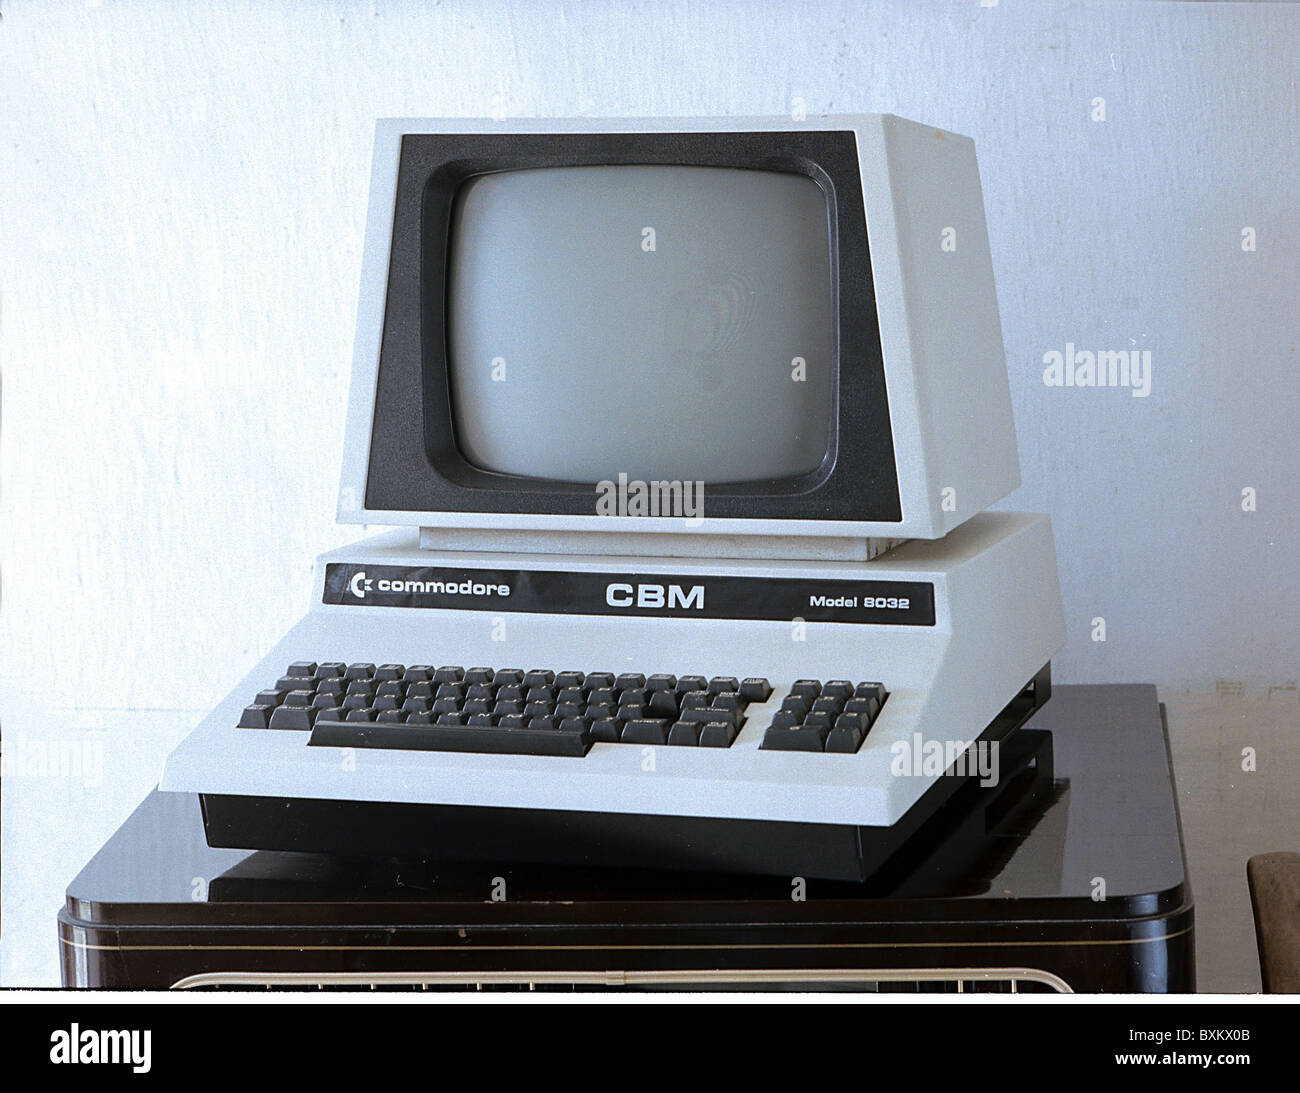 computing / electronics, computer, Commodore CBM 8032, USA 1979, historic, historical, computer, technic, technics, 1980s, 80s, 20th century, screen, monitor, monitors, integrated keyboard, homecomputer, electronics, hardware, 1970s, Additional-Rights-Clearences-Not Available Stock Photo